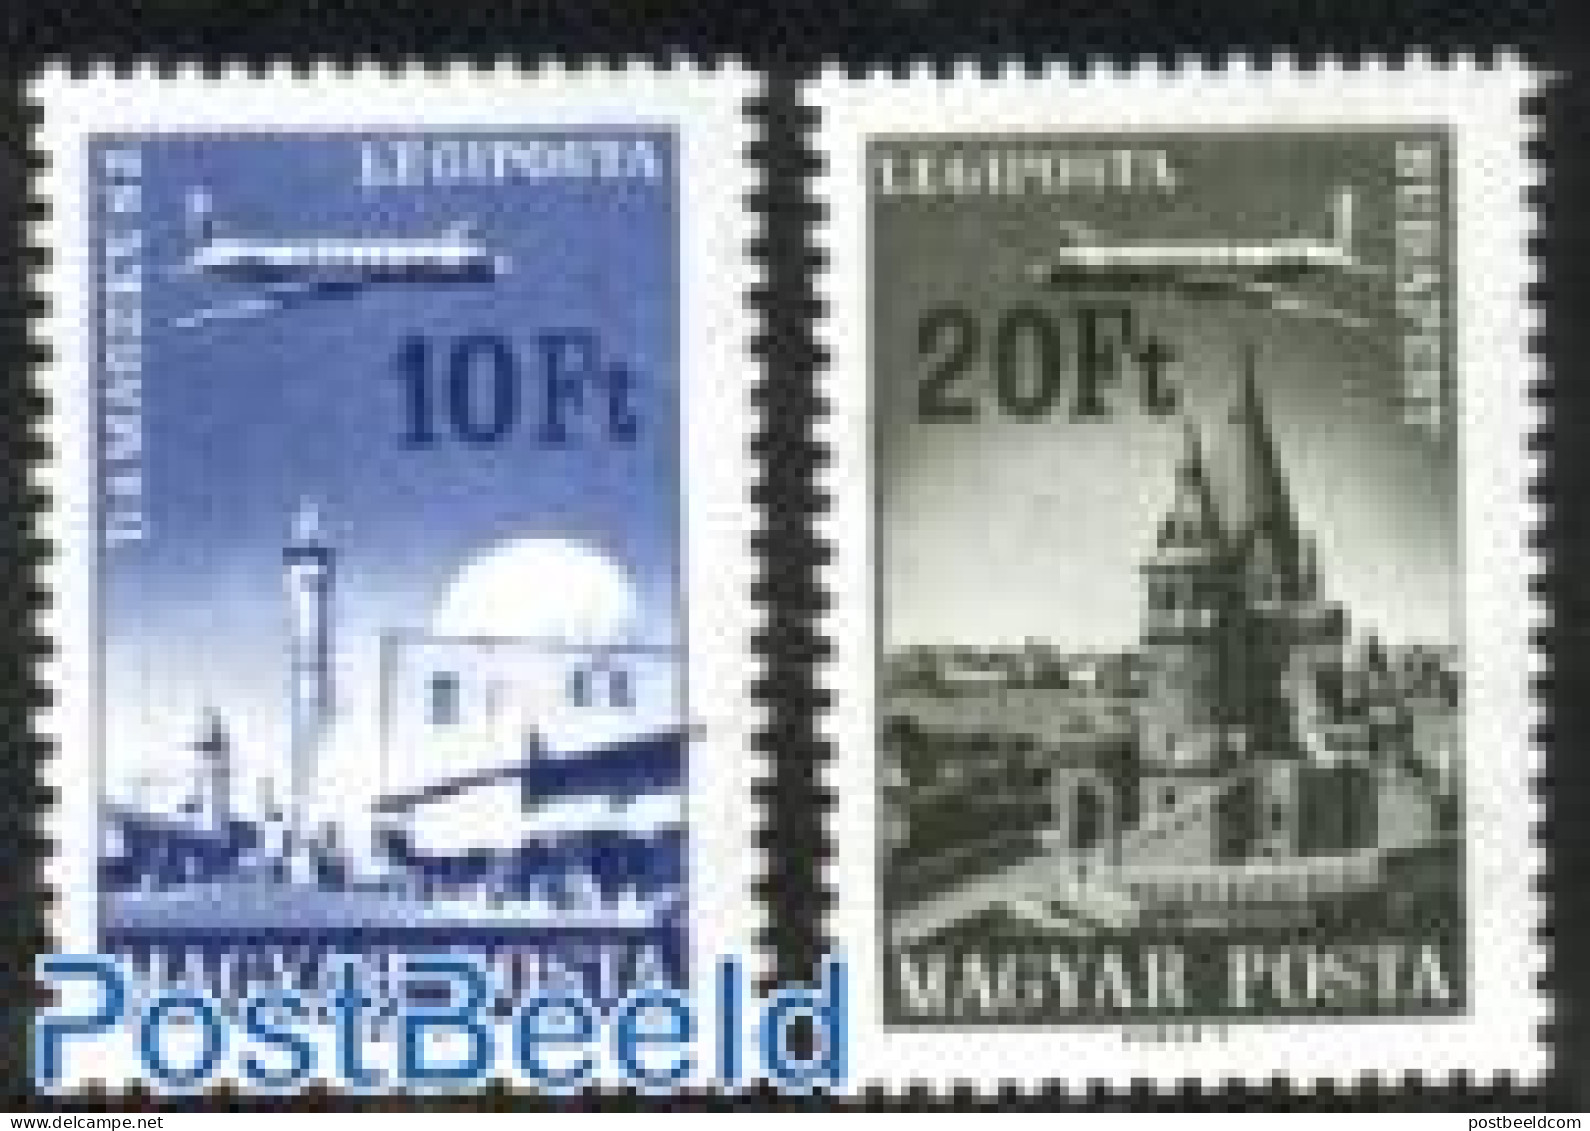 Hungary 1967 Cities 2v, Mint NH, Religion - Transport - Churches, Temples, Mosques, Synagogues - Aircraft & Aviation - Unused Stamps